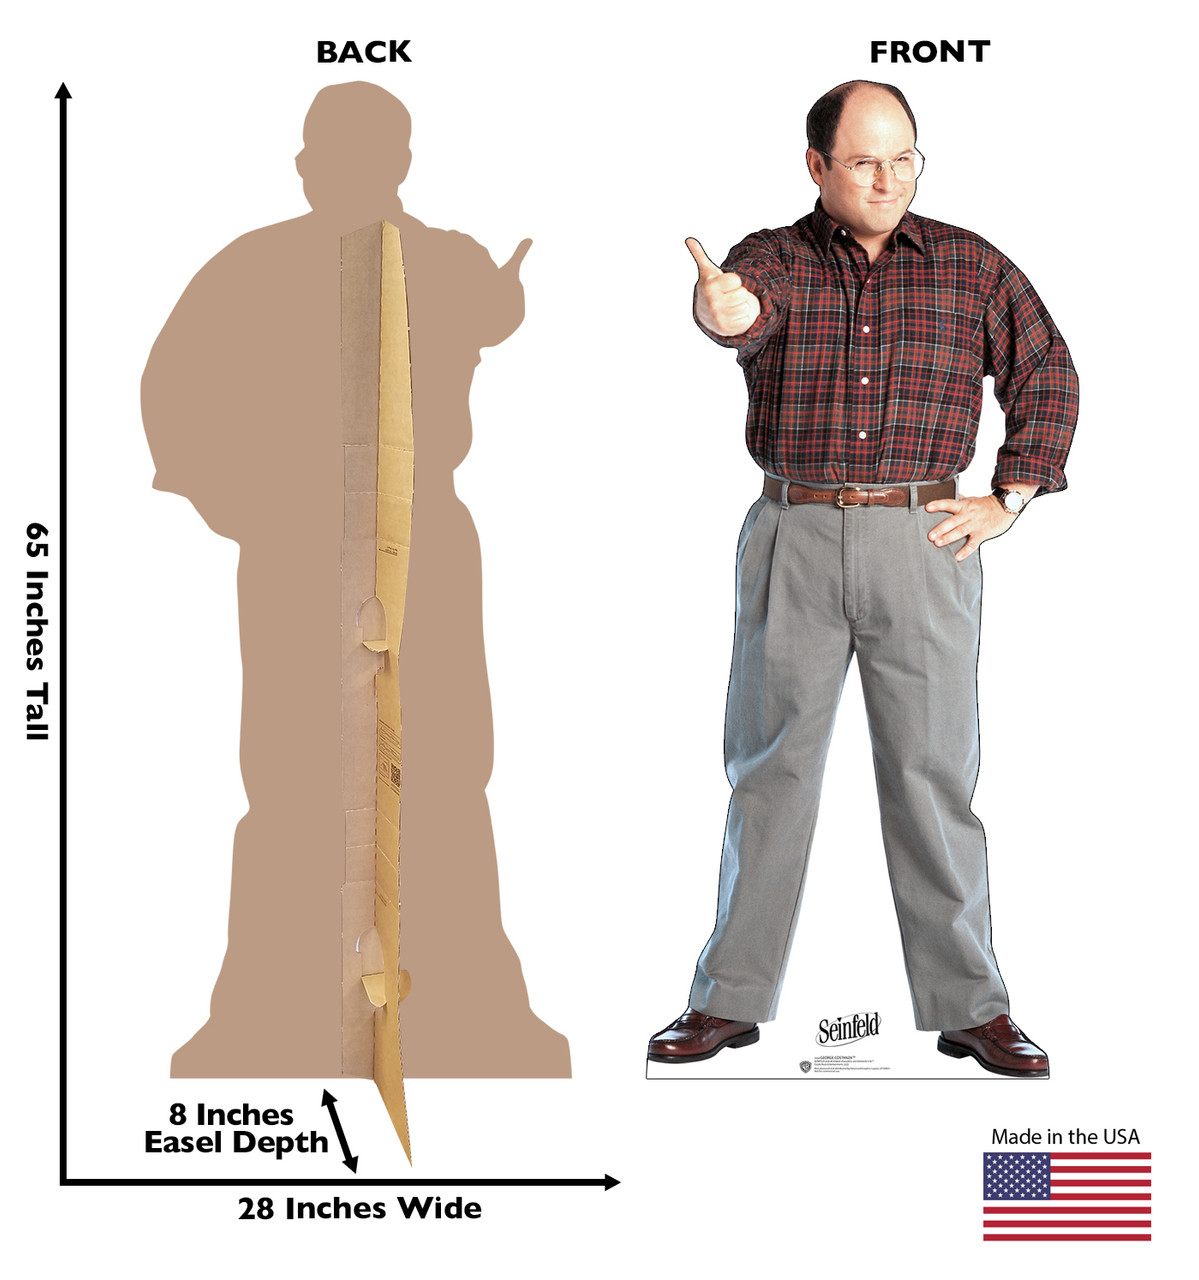 Life-size cardboard standee of George Costanza from the Hit TV Series Seinfeld with back and front dimensions.